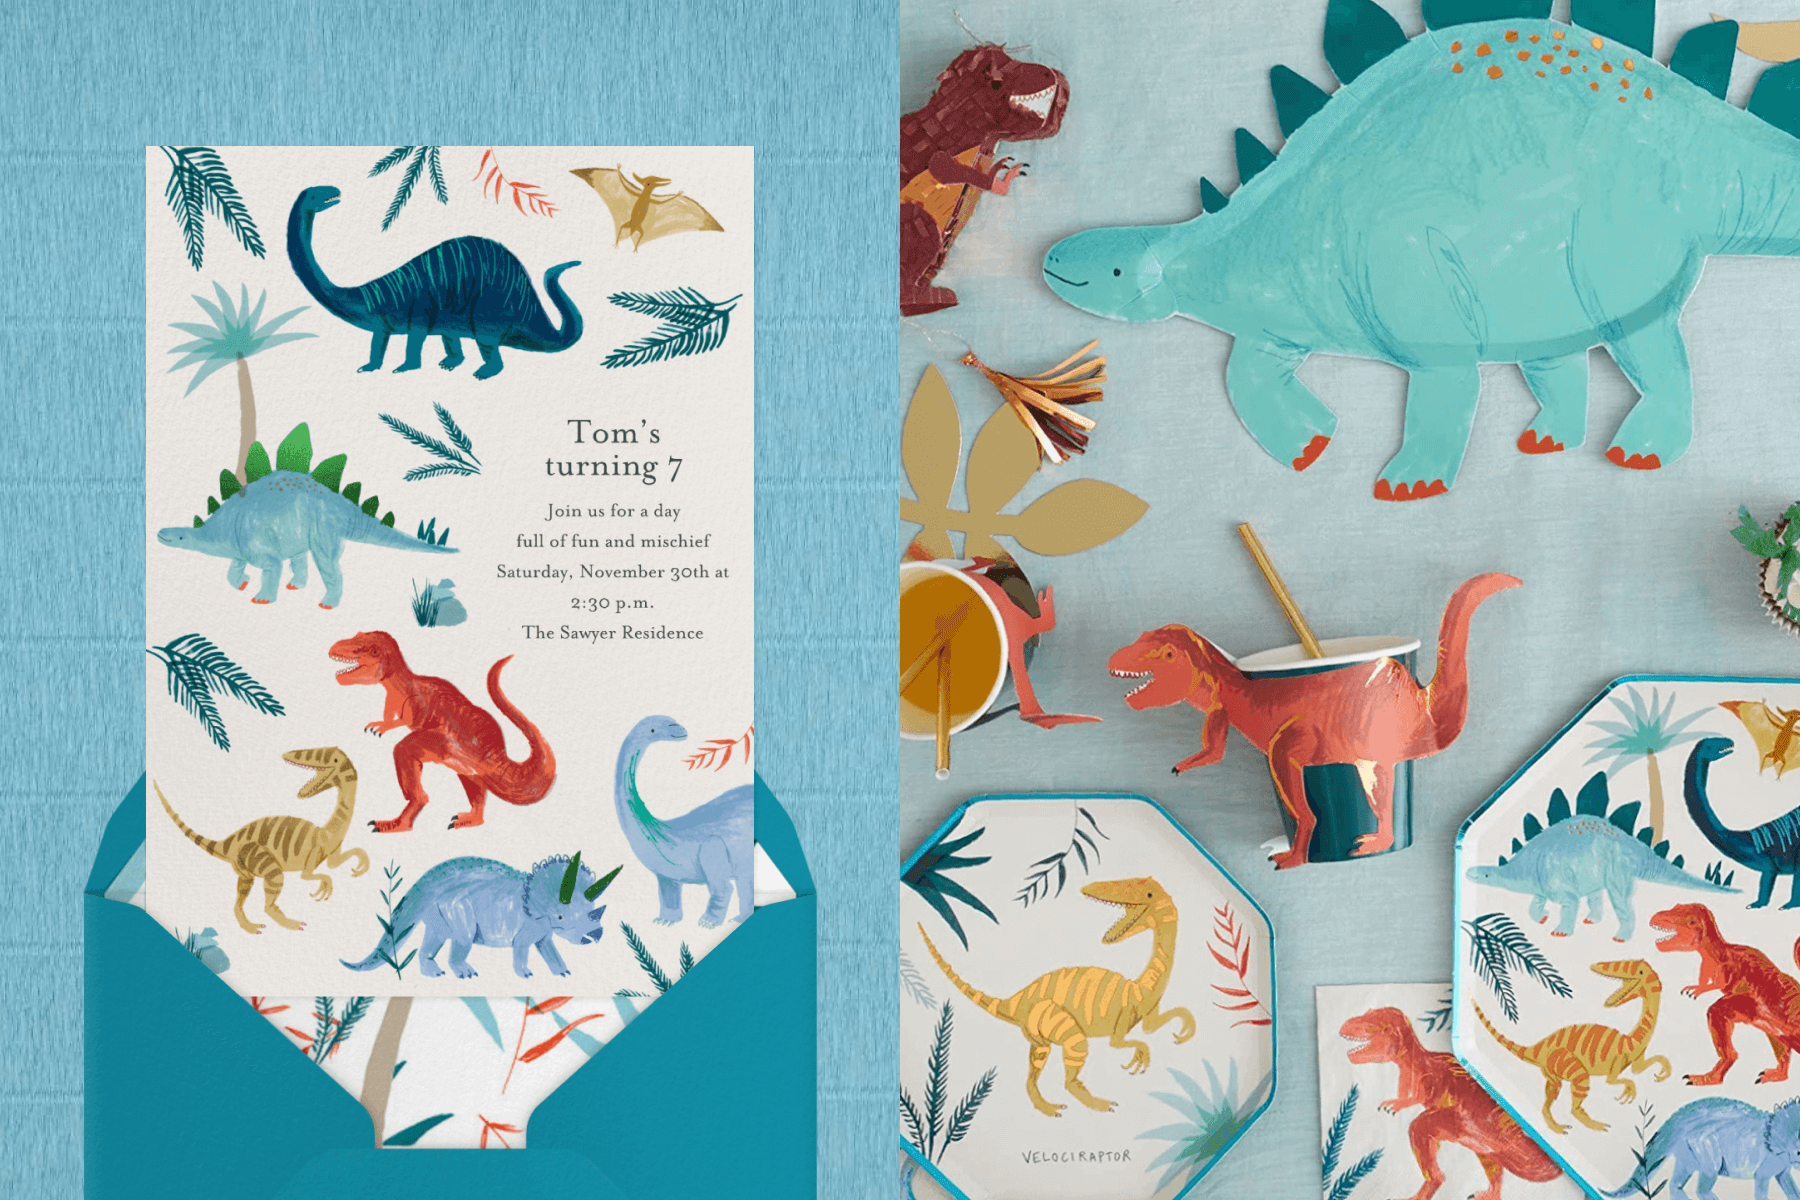 An invitation with colorful dinosaurs; dinosaur-shaped paper plates and party cups.